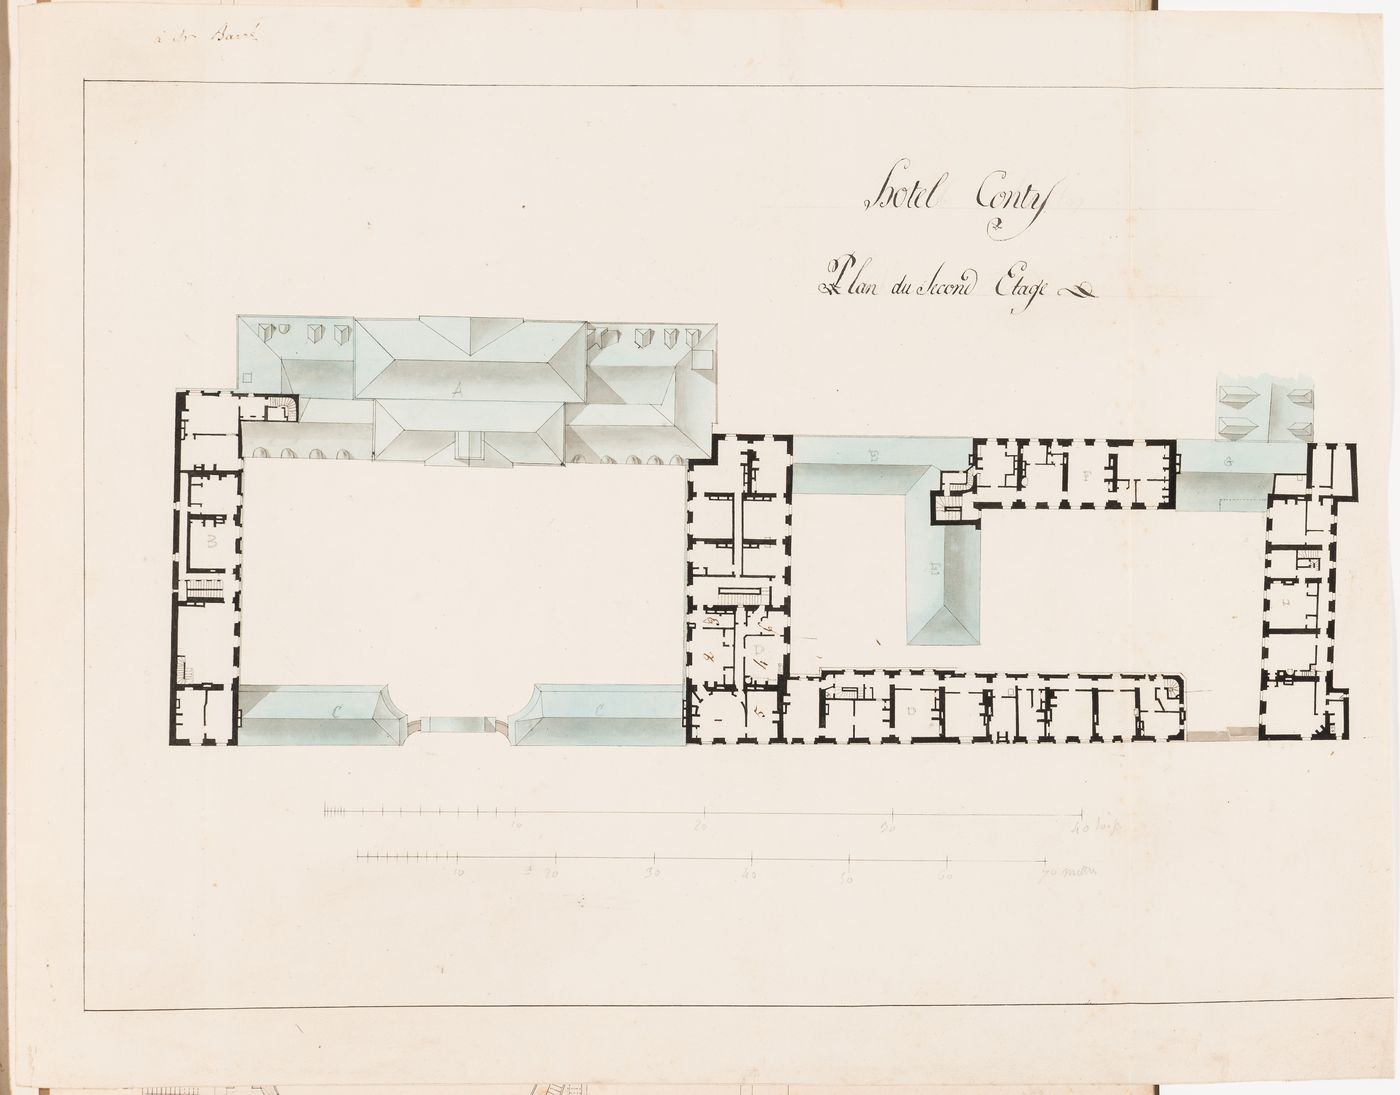 Hôtel Rothelin-Charolais, Paris: Plan, possibly for the second floor